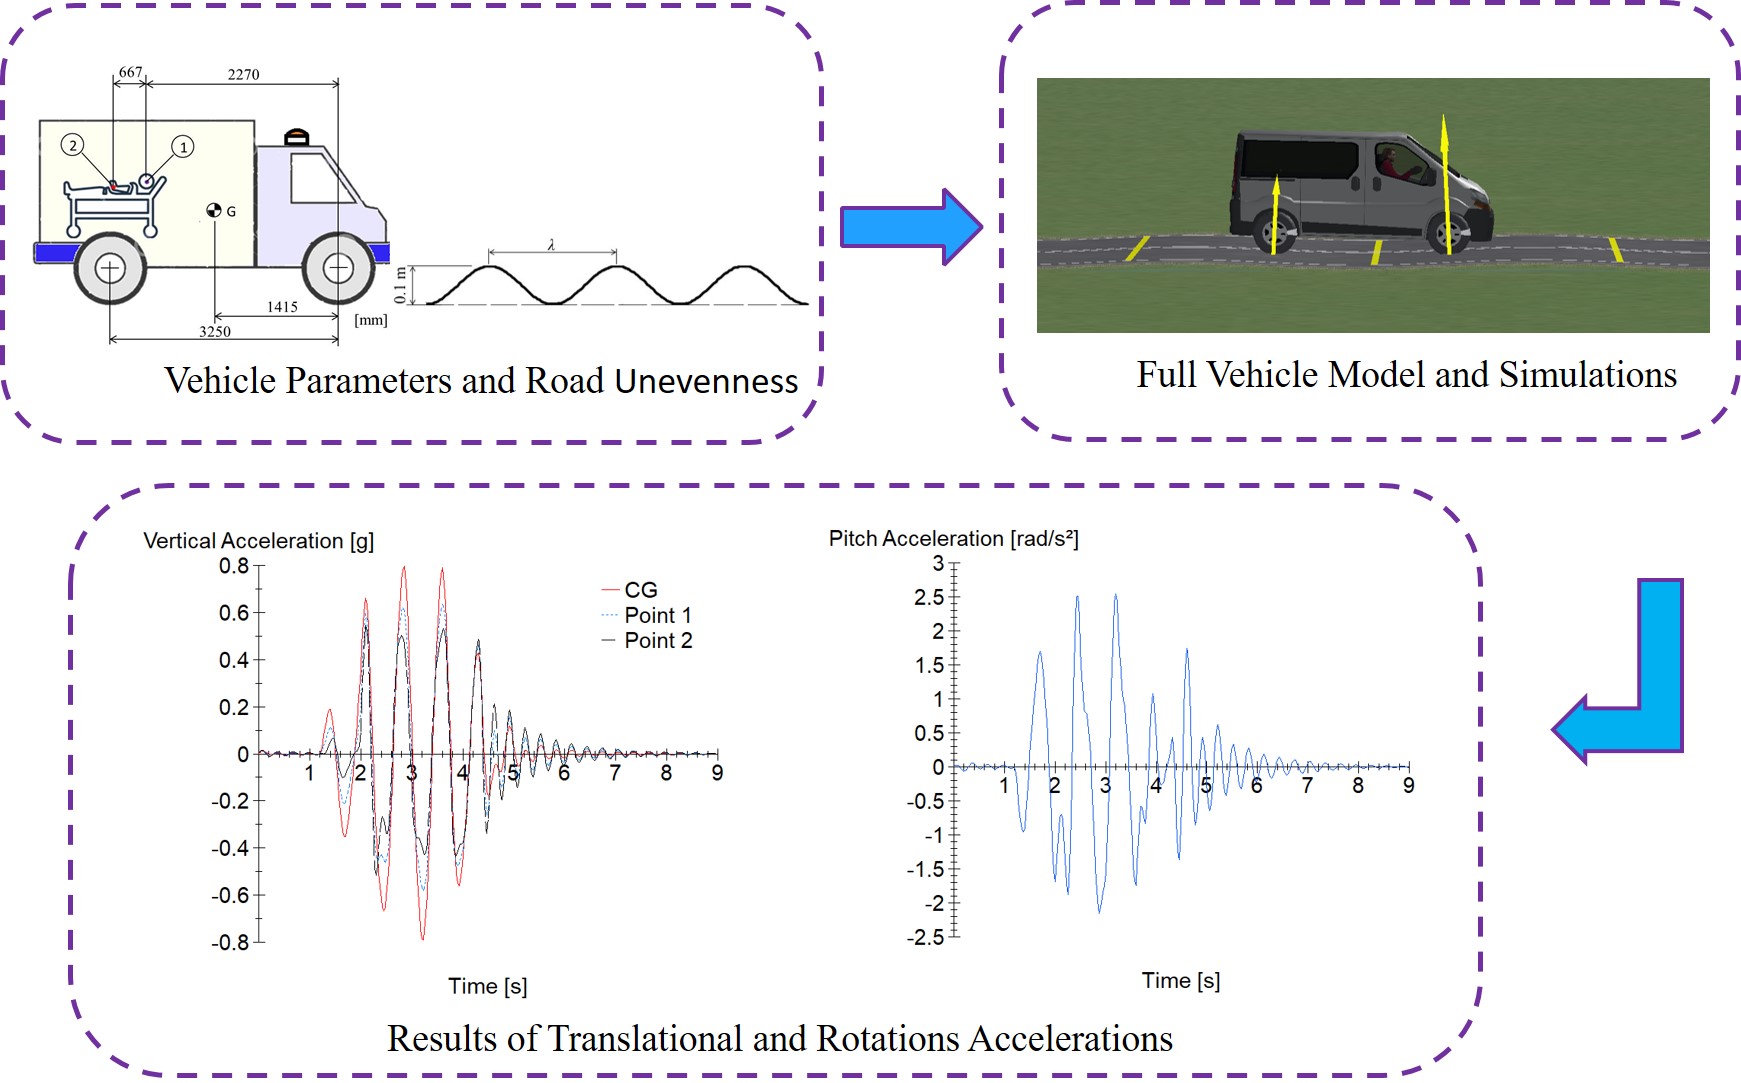 Analysis of movements and degrees of freedom required for a vibration attenuation system on ambulance stretchers